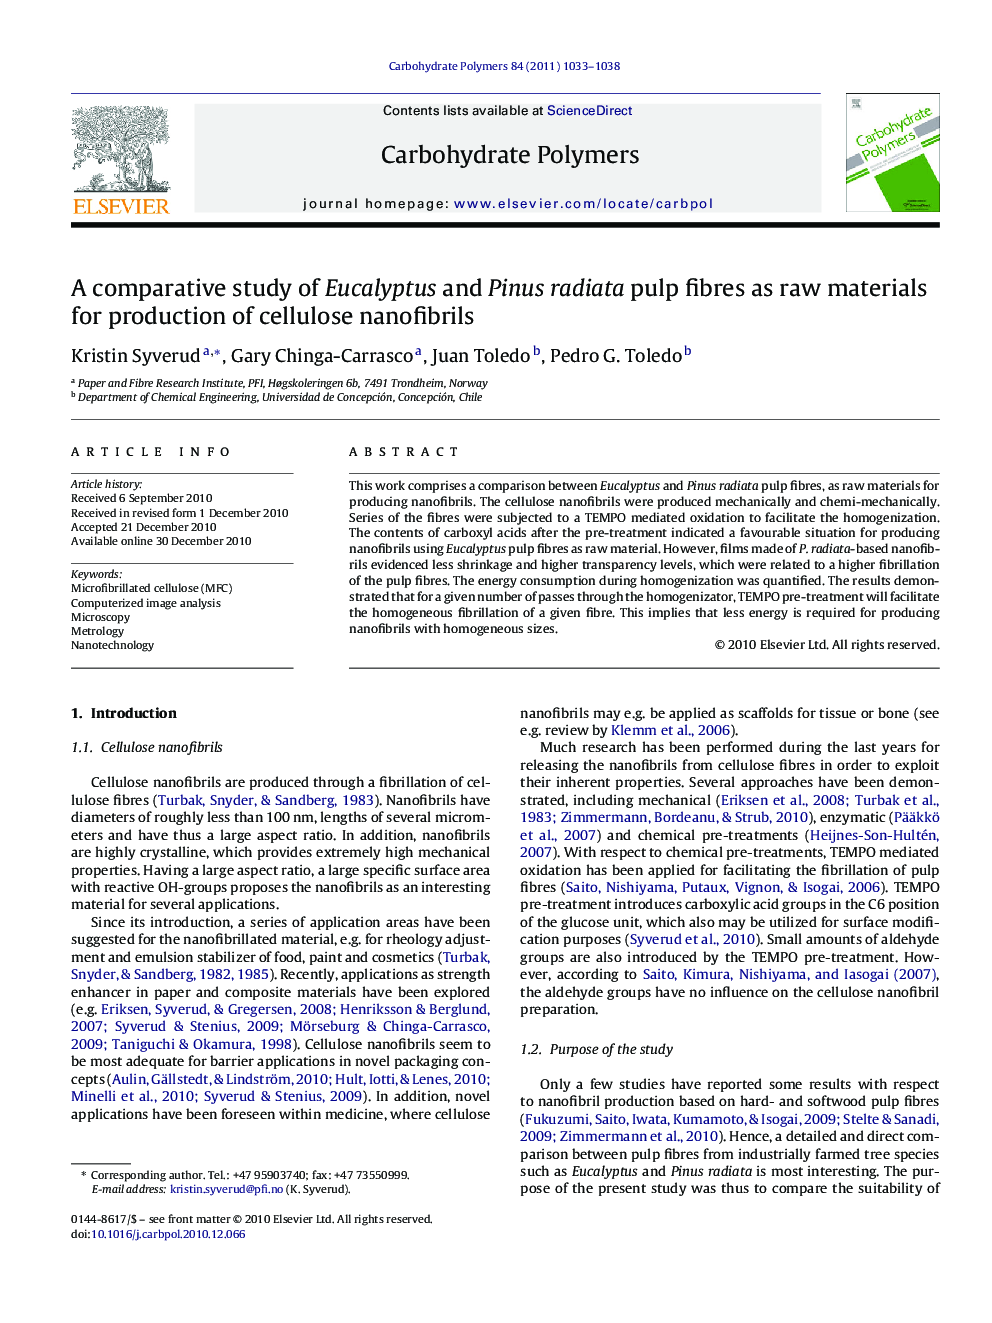 A comparative study of Eucalyptus and Pinus radiata pulp fibres as raw materials for production of cellulose nanofibrils